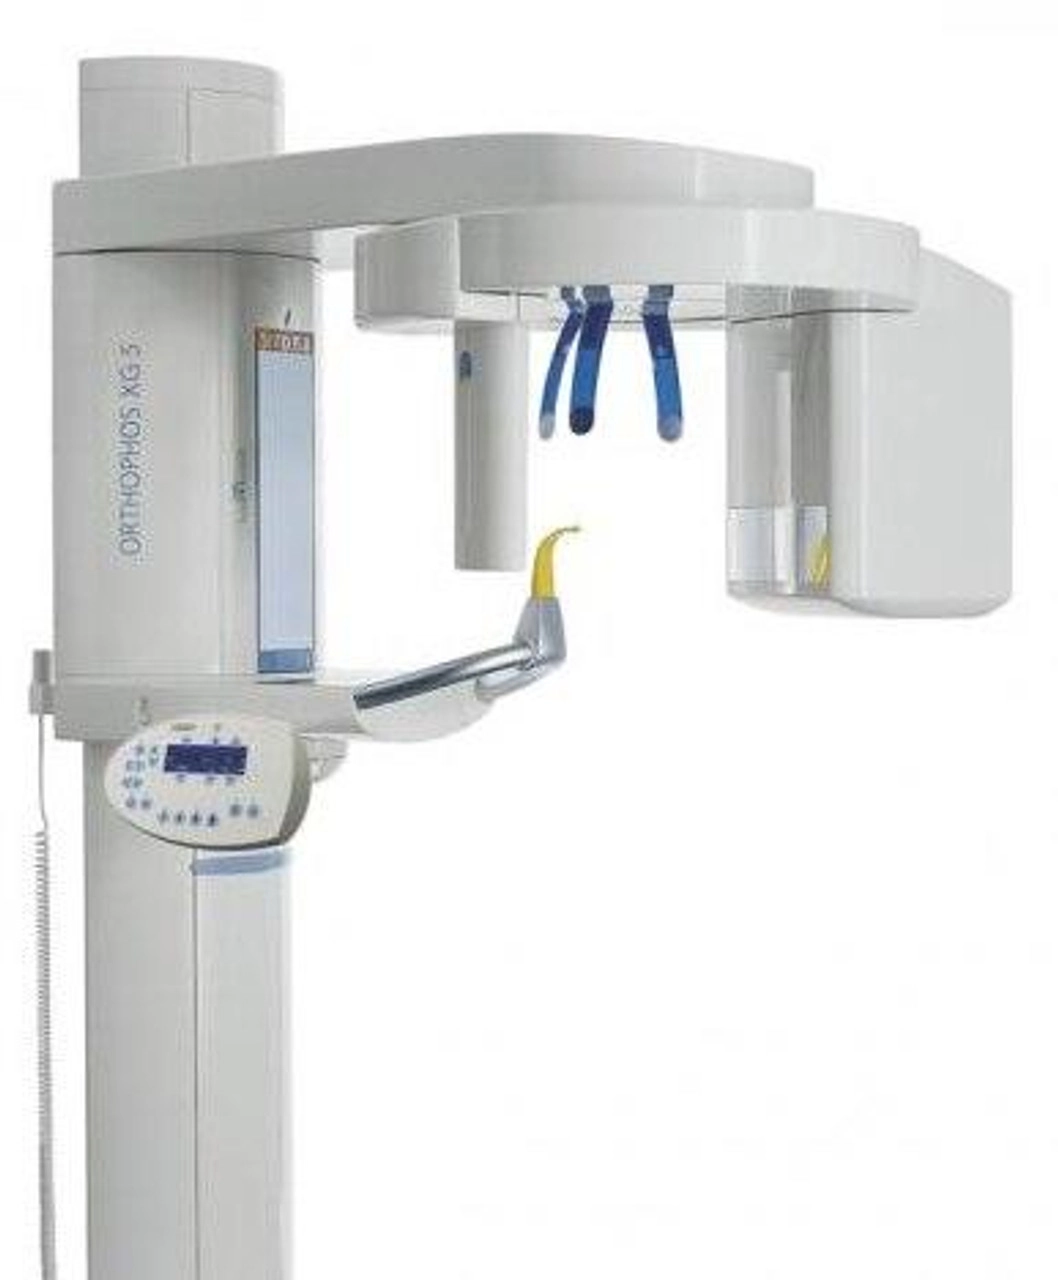 How Much Does a Sirona CBCT System Cost?